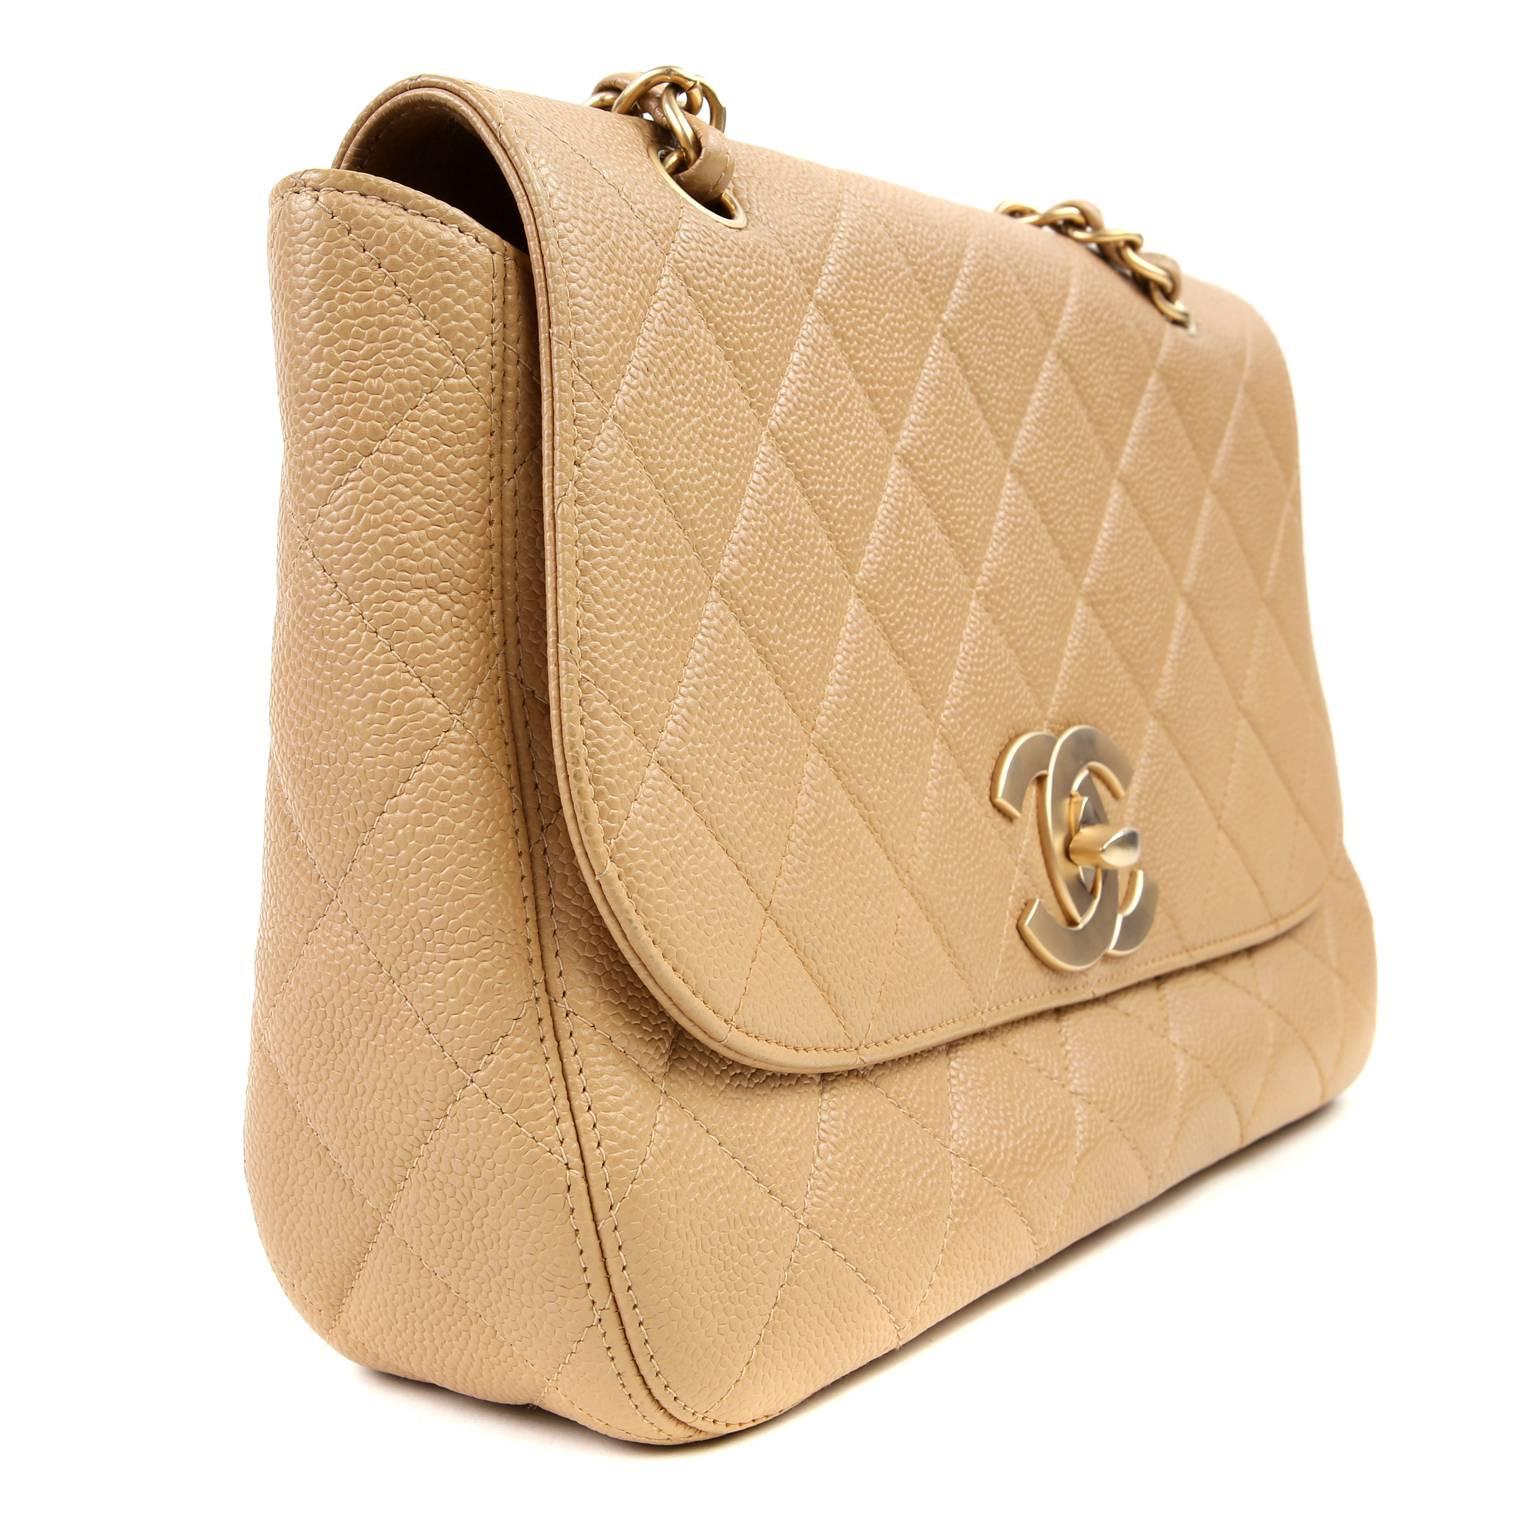 Chanel Beige Caviar Classic Flap- Excellent PLUS

  Perfectly sized for easy day to evening transitions, this timeless Chanel is a smart addition to any collection.  

Textured and durable beige caviar leather is quilted in signature Chanel